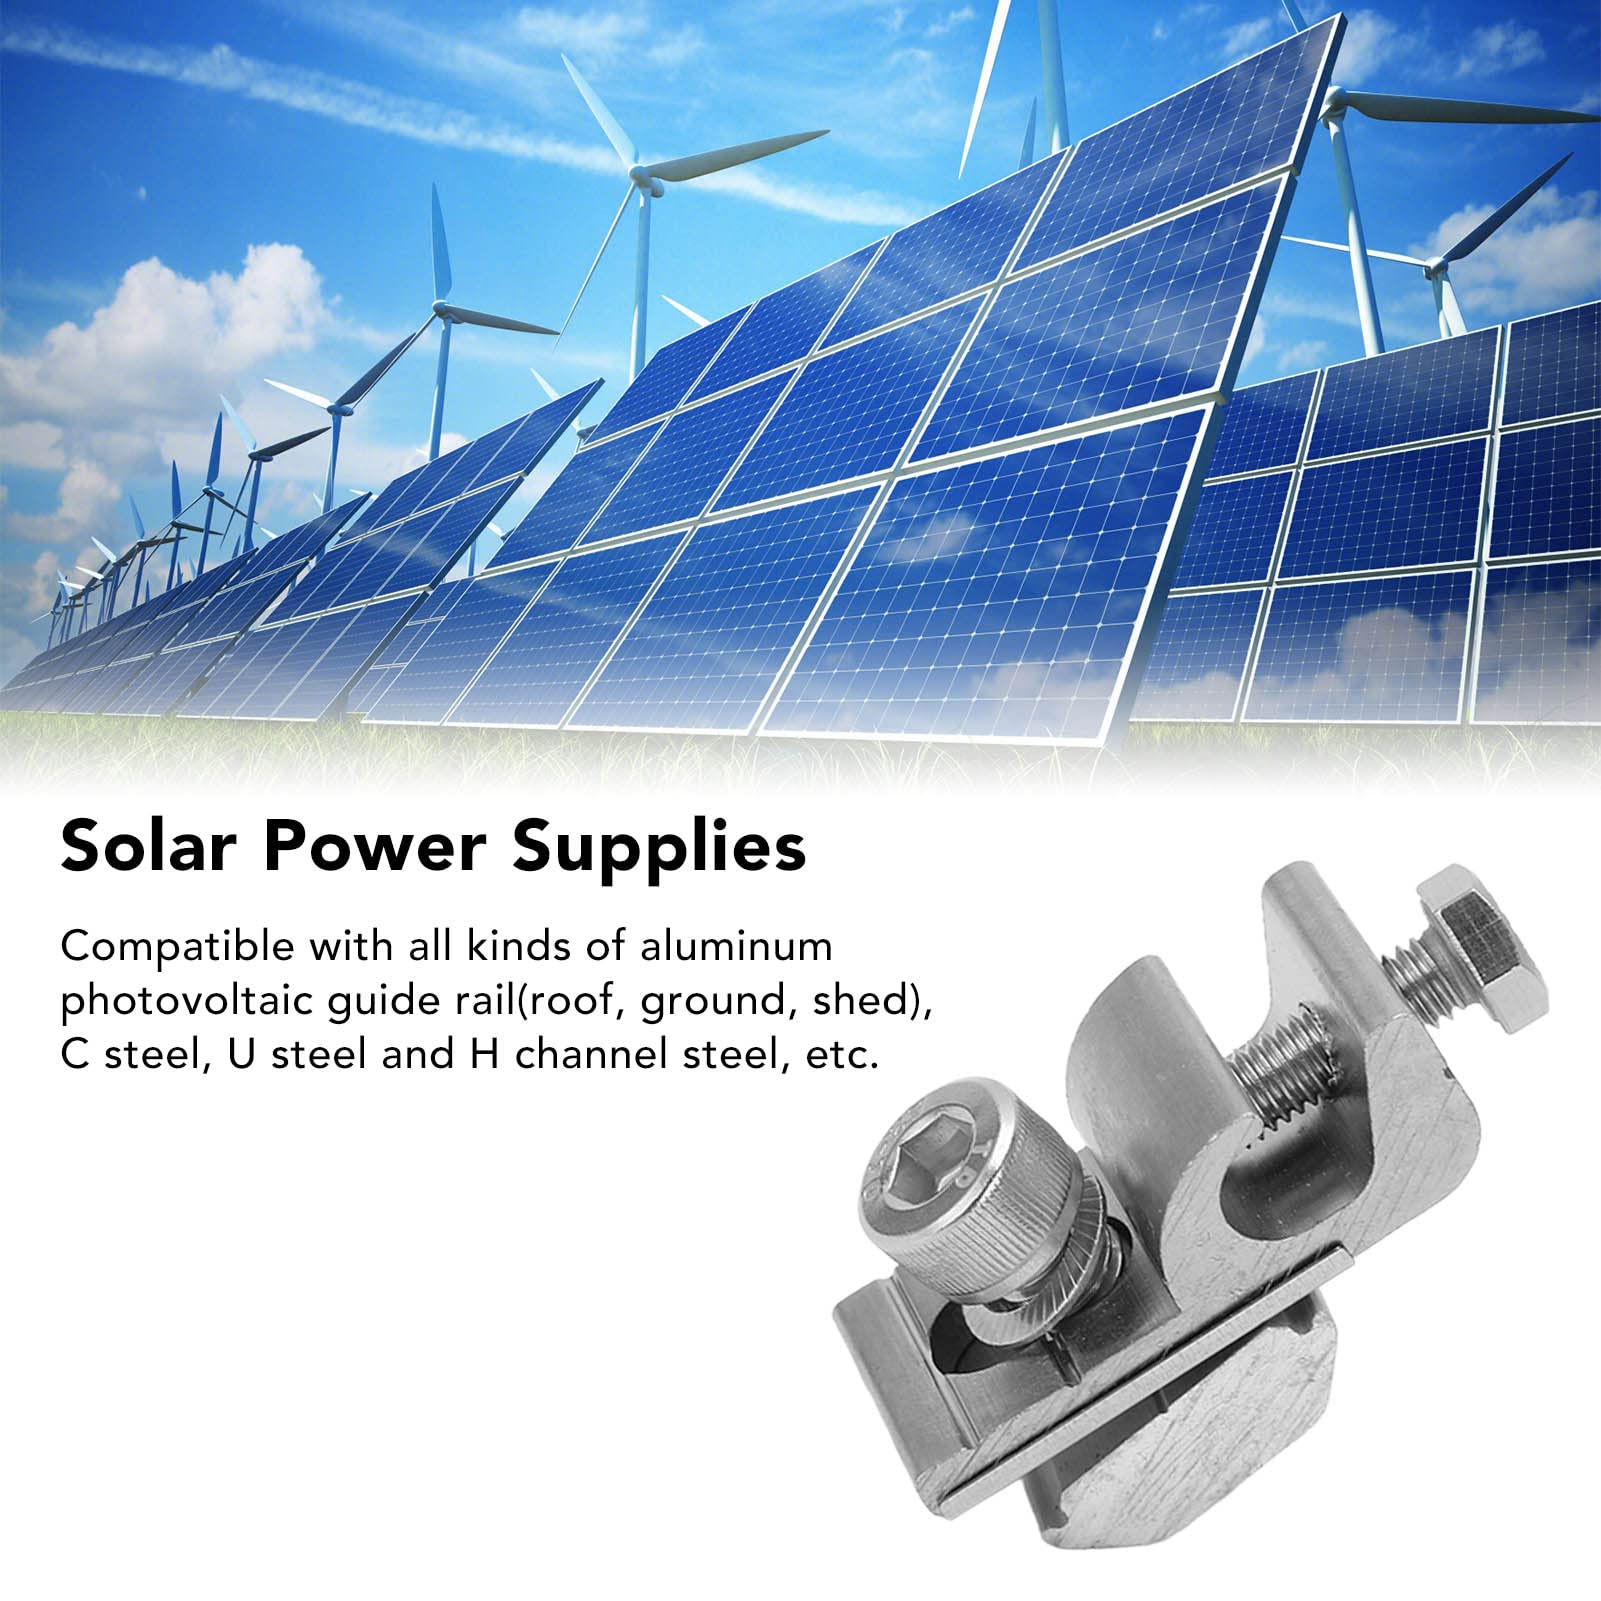 Solar Panel Grounding Clips Set 10Pcs, Solar Panel Photovoltaic On Coupling Earthing Ground Lug, Solid Aluminum and Stainless Steel Ground Clamp with Lay in Lug for Bare Wire Pipe